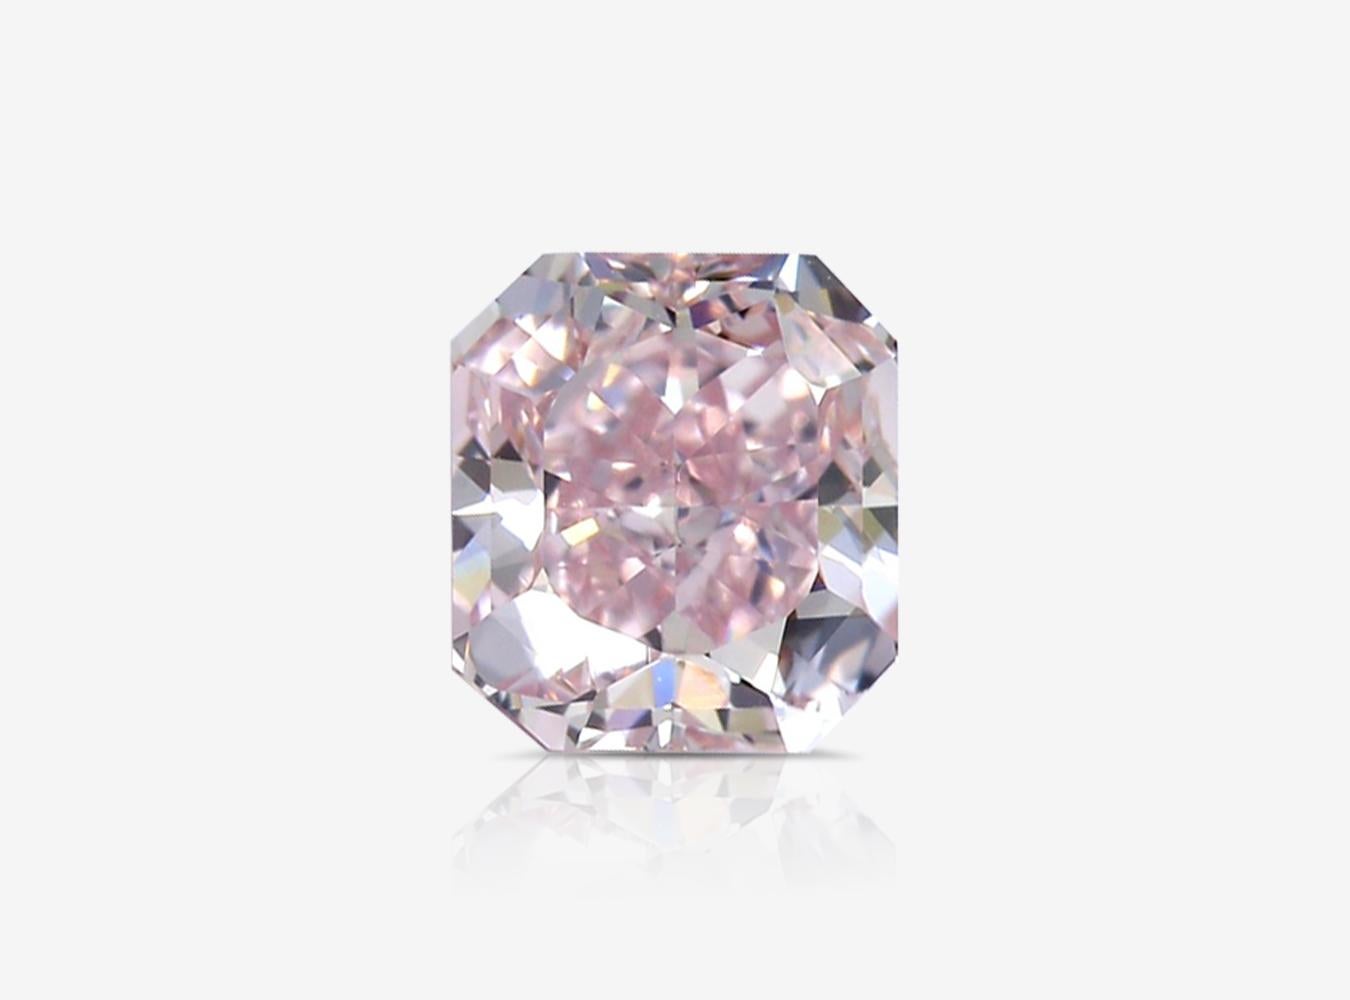 An exquisite investment grade pink diamond with no other colors but even pink and exceptional Internally Flawless clarity certified by GIA.

The most basic pricing principle in the world of natural diamonds, whether fancy colored or colorless,